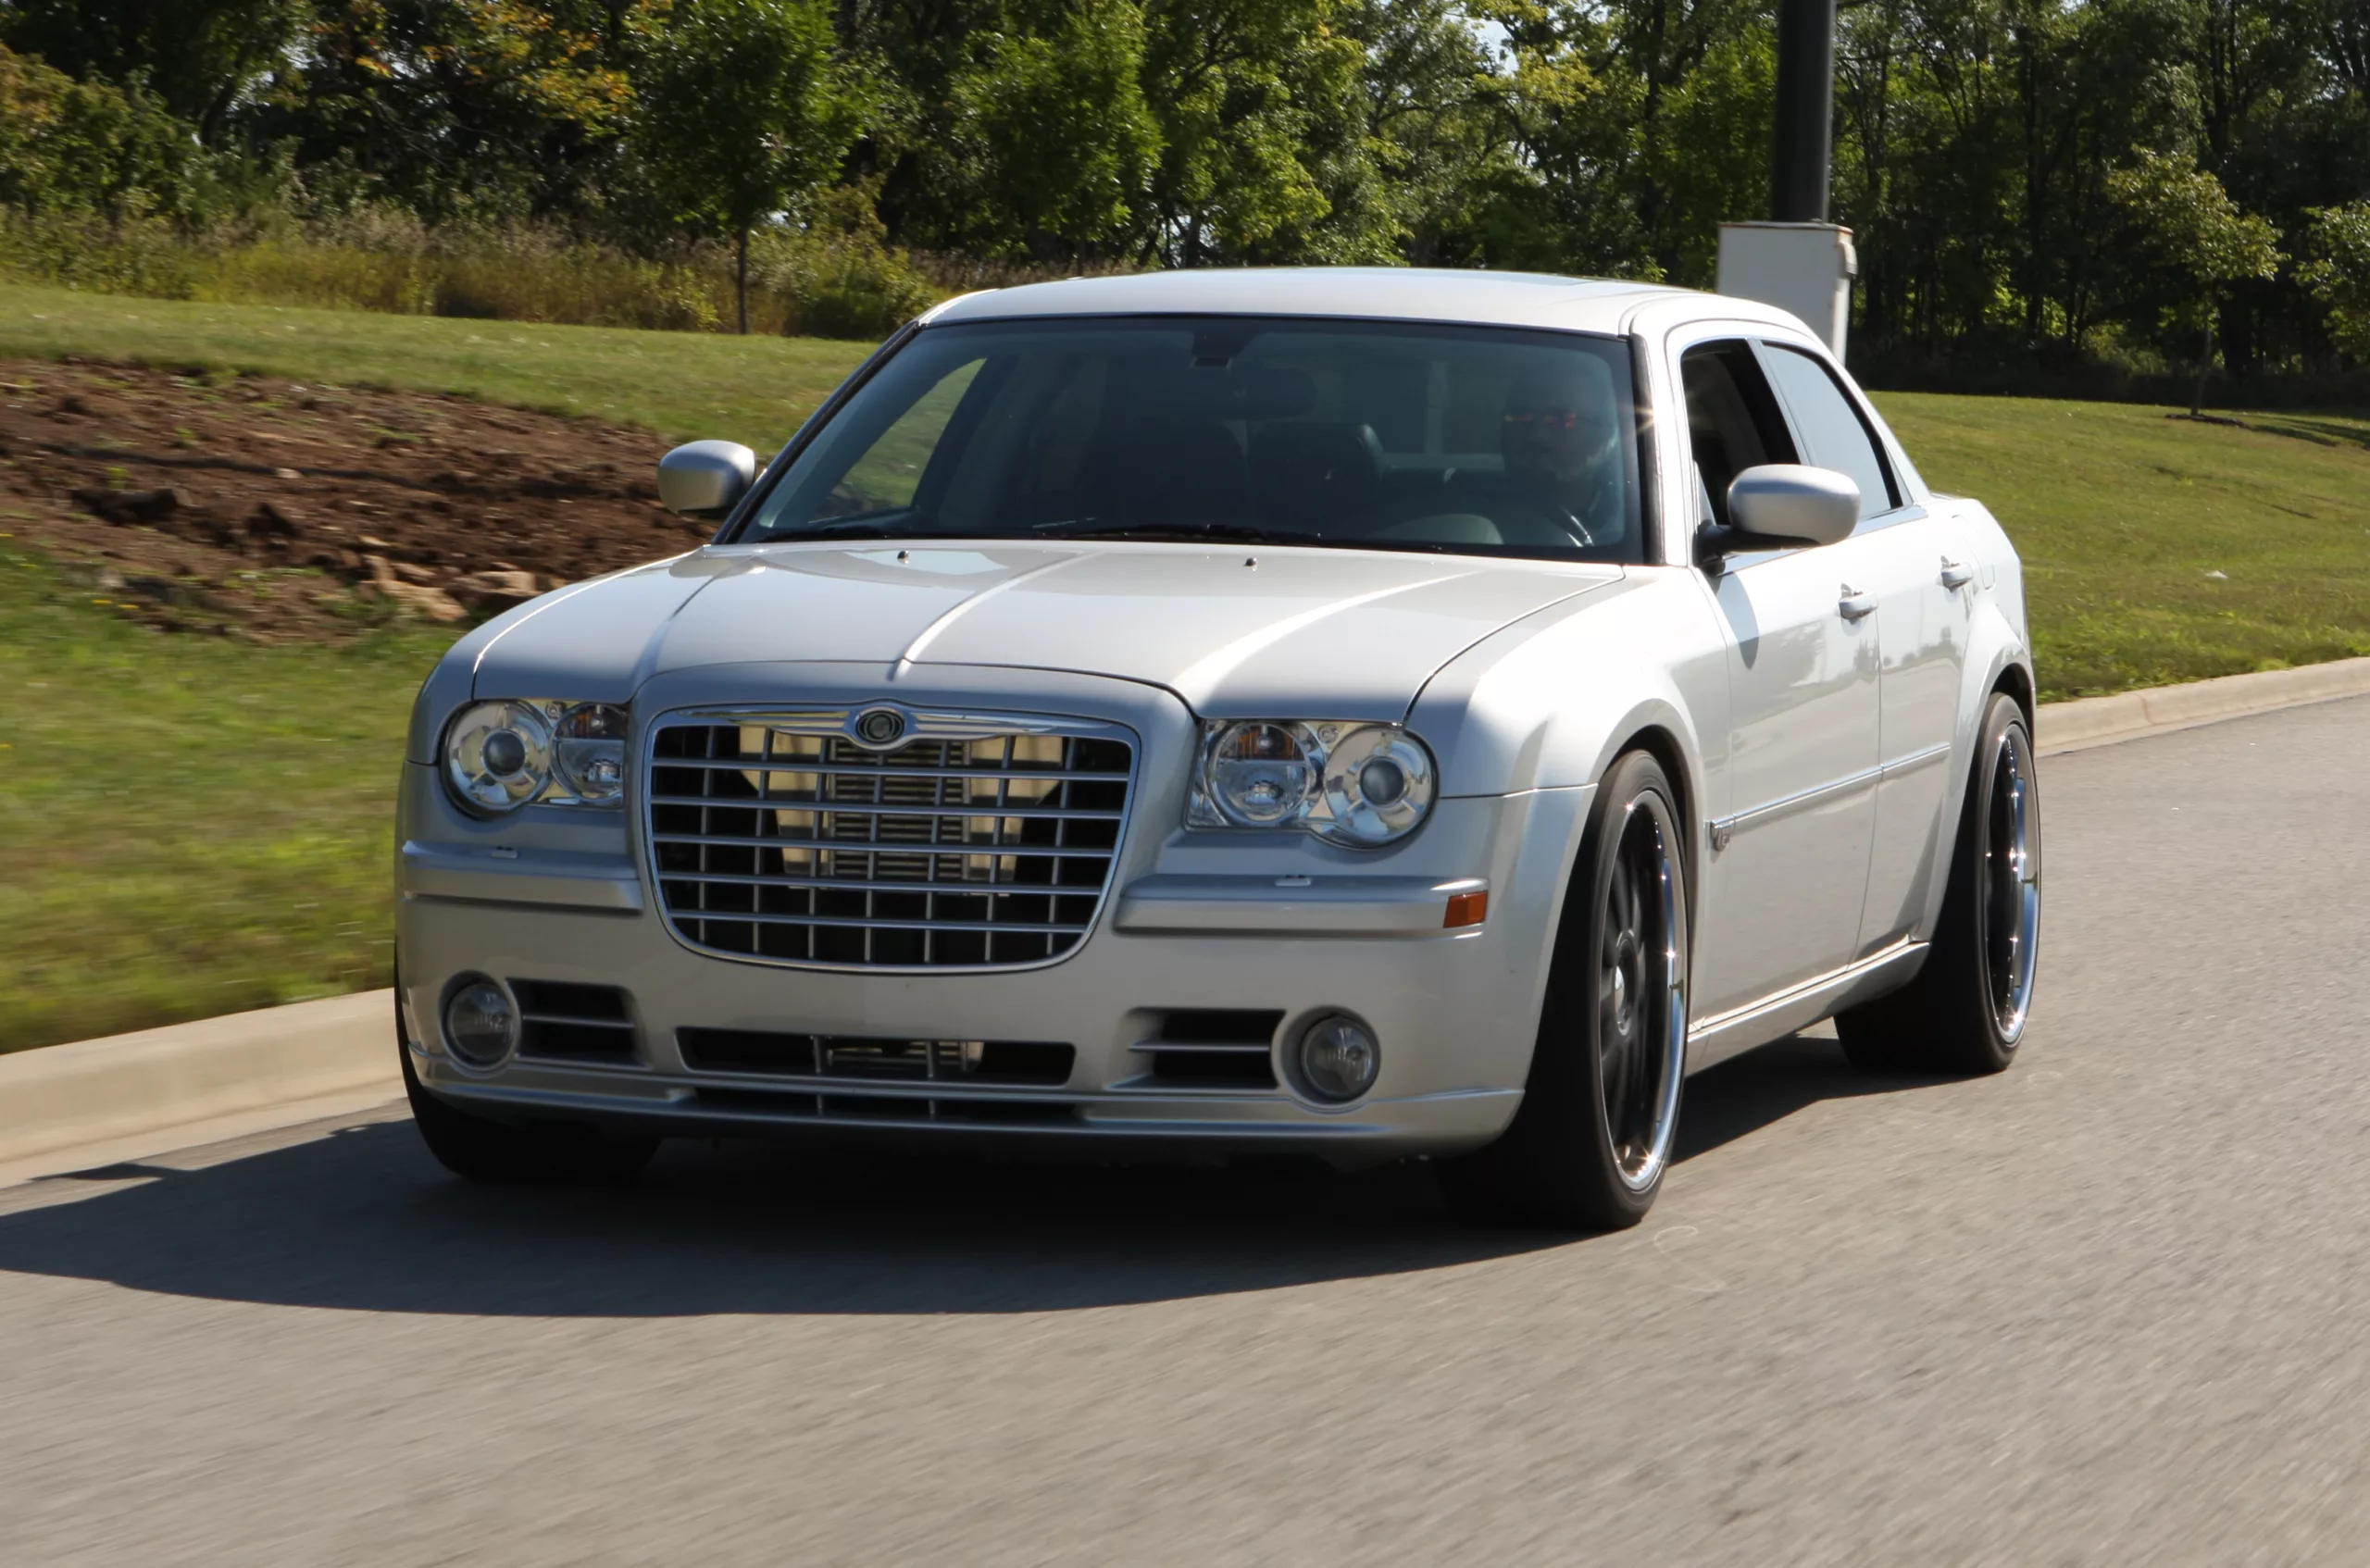 2007 Chrysler 300 (6.1) ProCharged driving